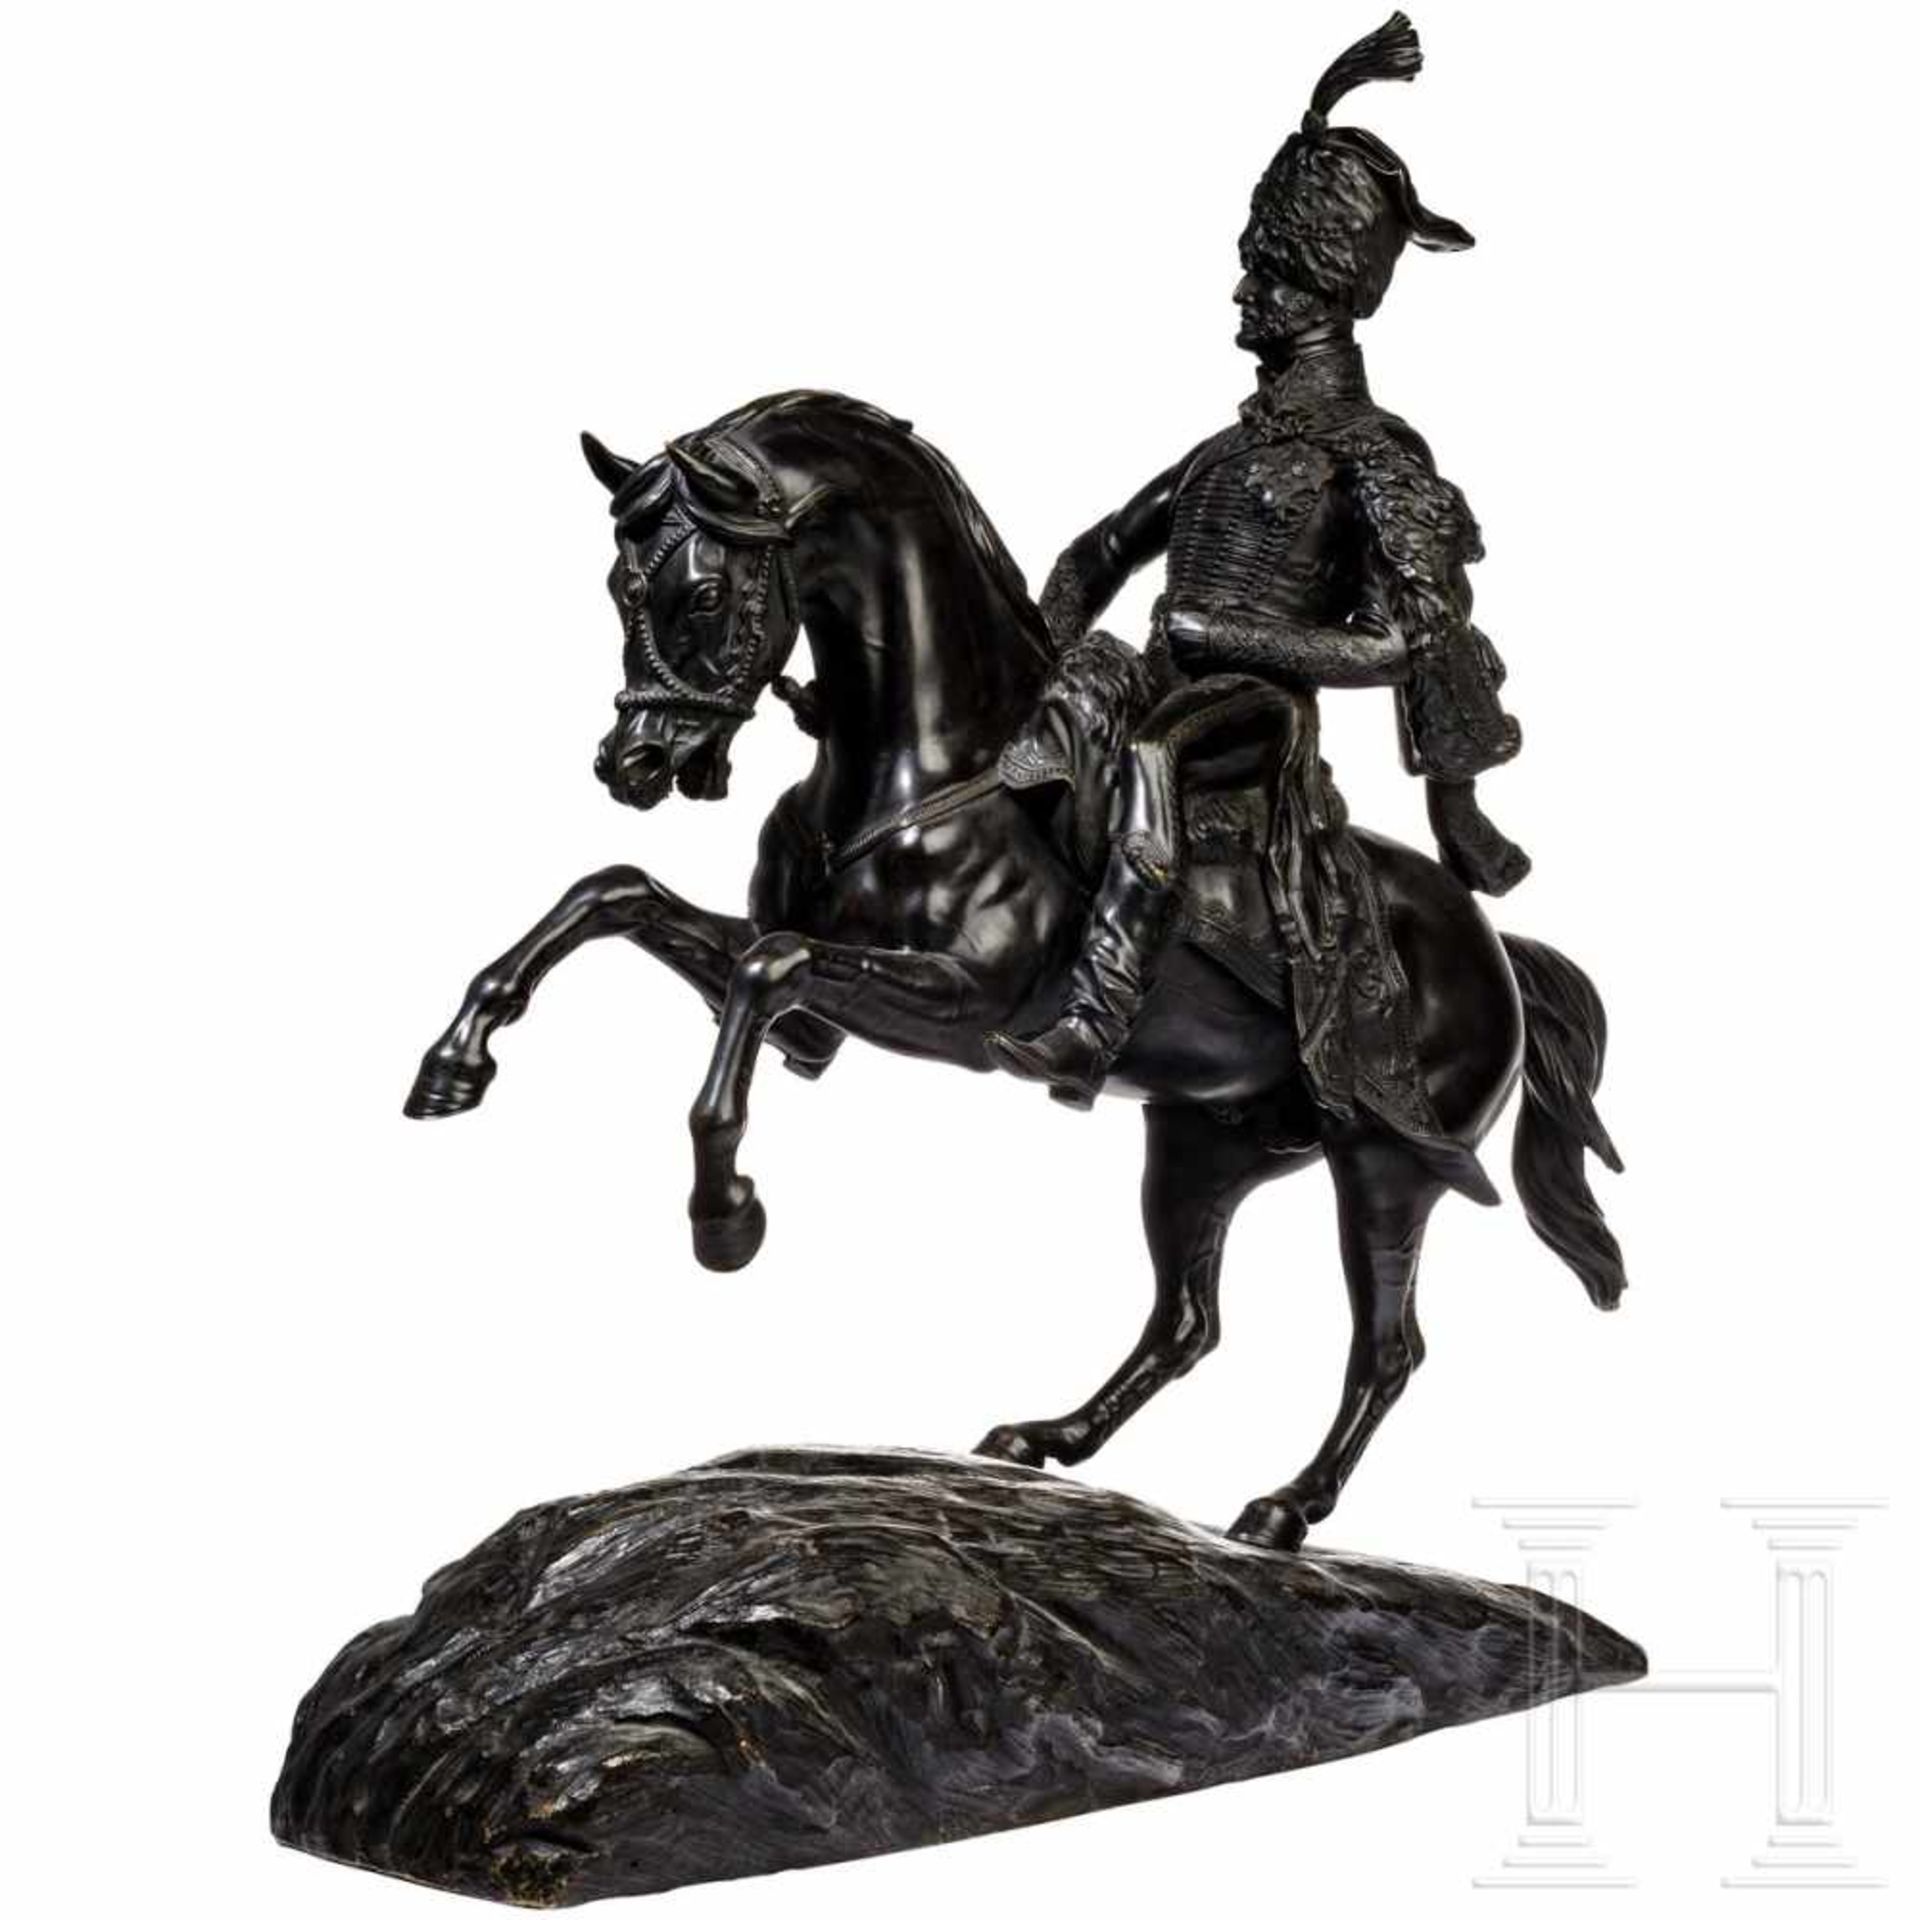 General Charles Vane Stewart, 3rd Marquis of Londonderry – a French equestrian bronze statue, 19th